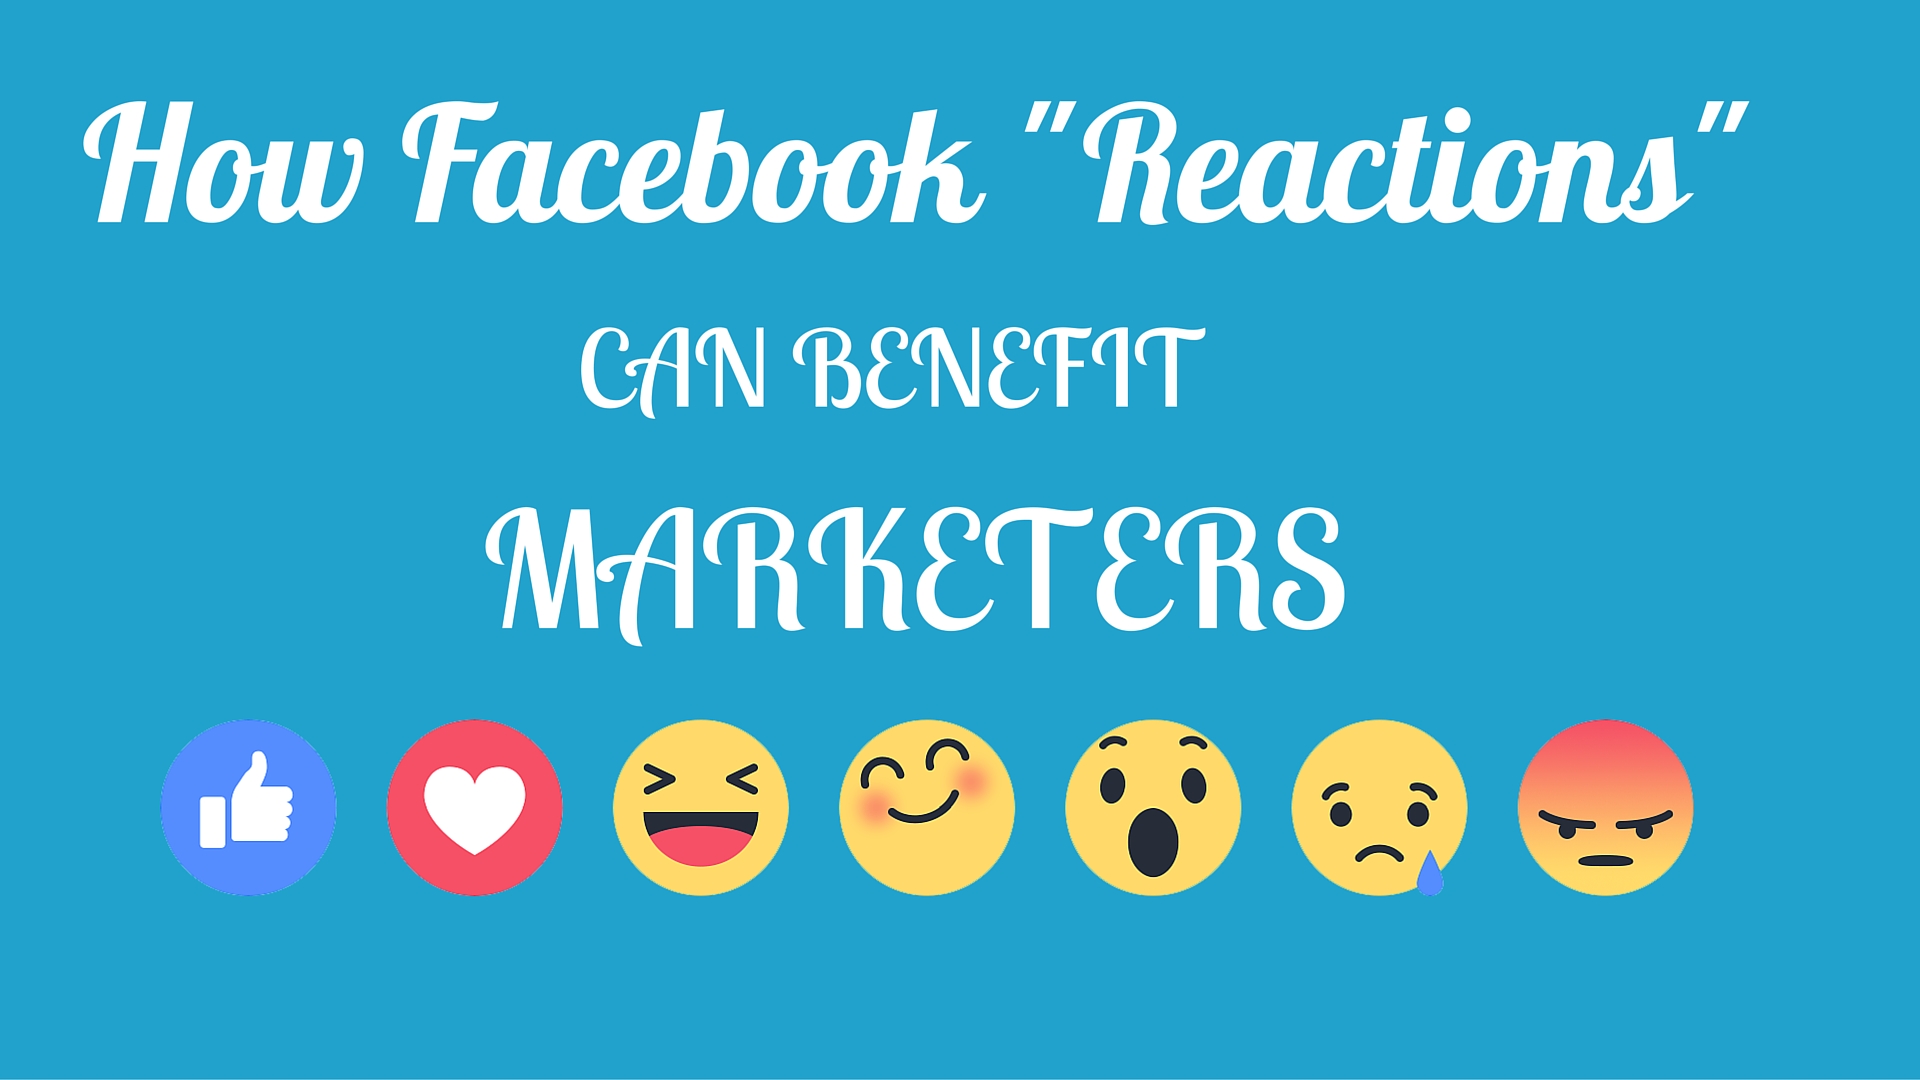 How Facebook “Reactions” Can Benefit Marketers